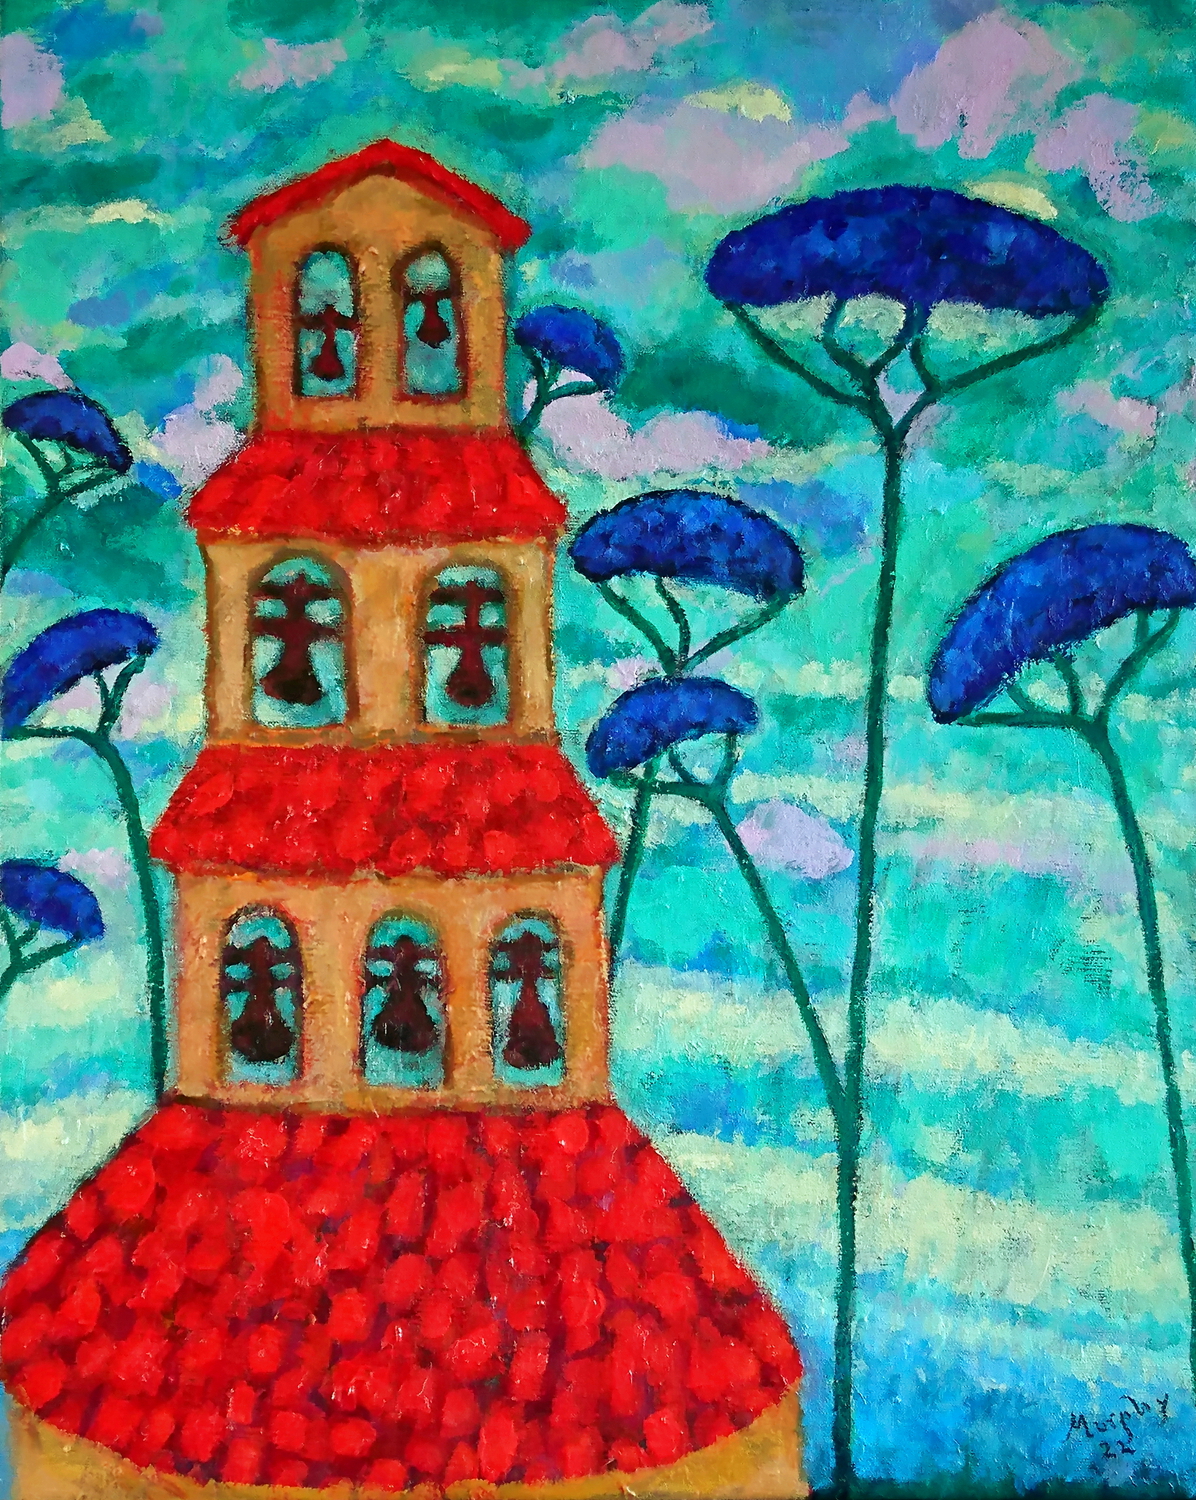 Ring-Out-the-Bells-61-x-50-cm-oil-on-canvas-web